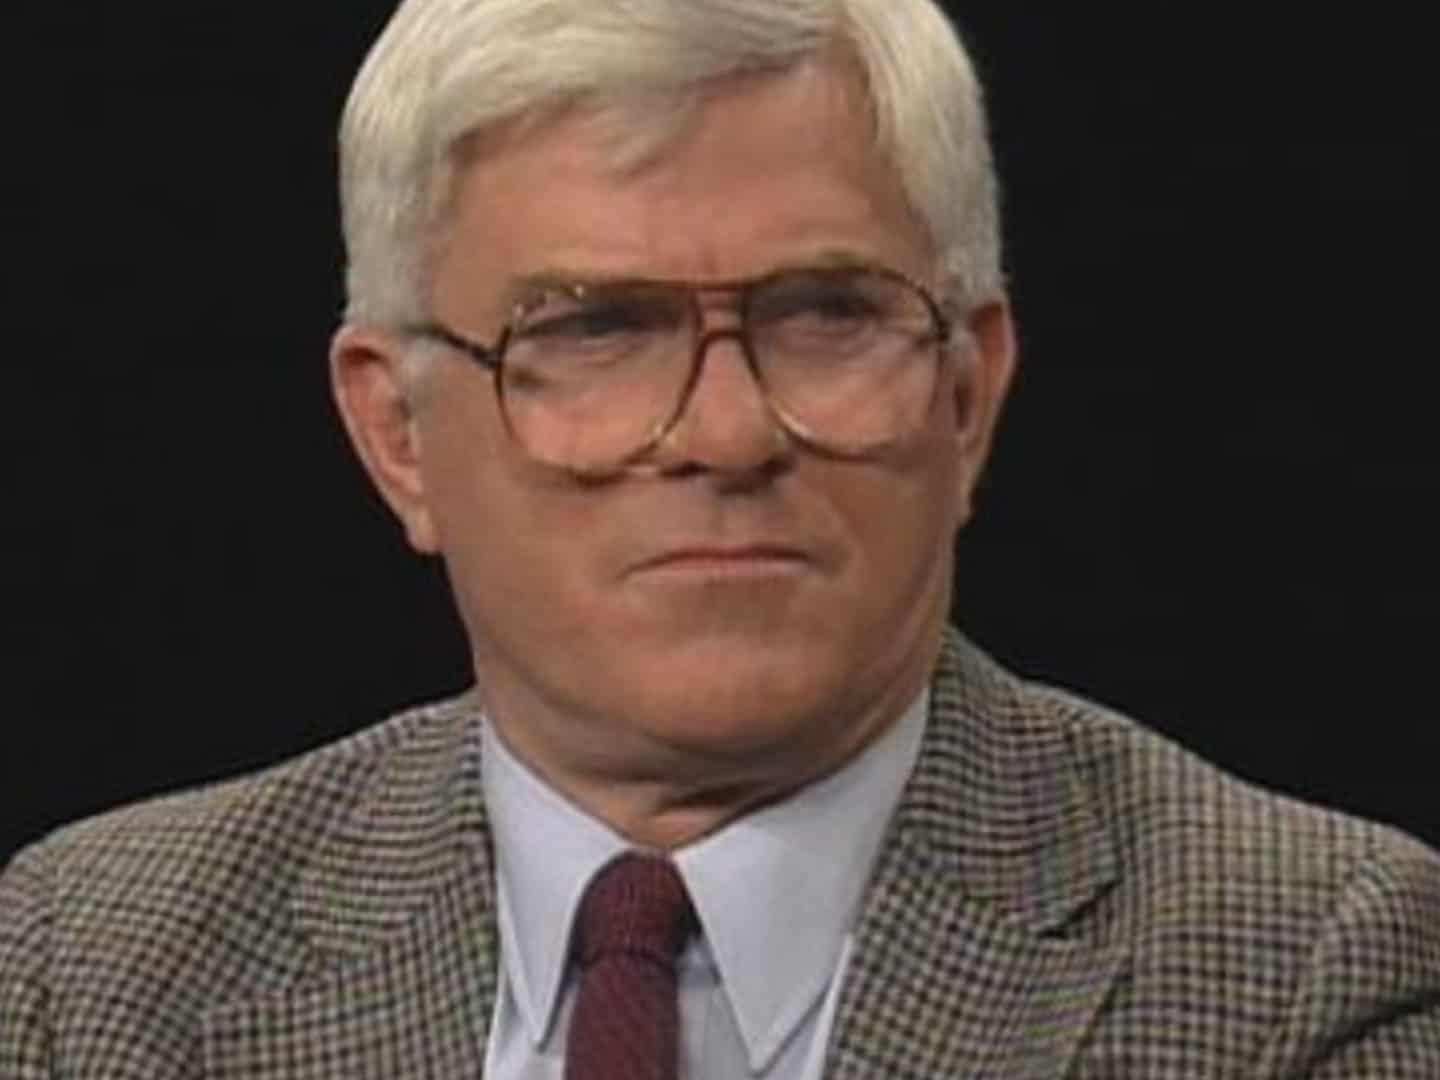 In 2006, Phil Donahue collaborated with independent filmmaker Ellen Spiro to co-direct the feature documentary film titled "Body of War"